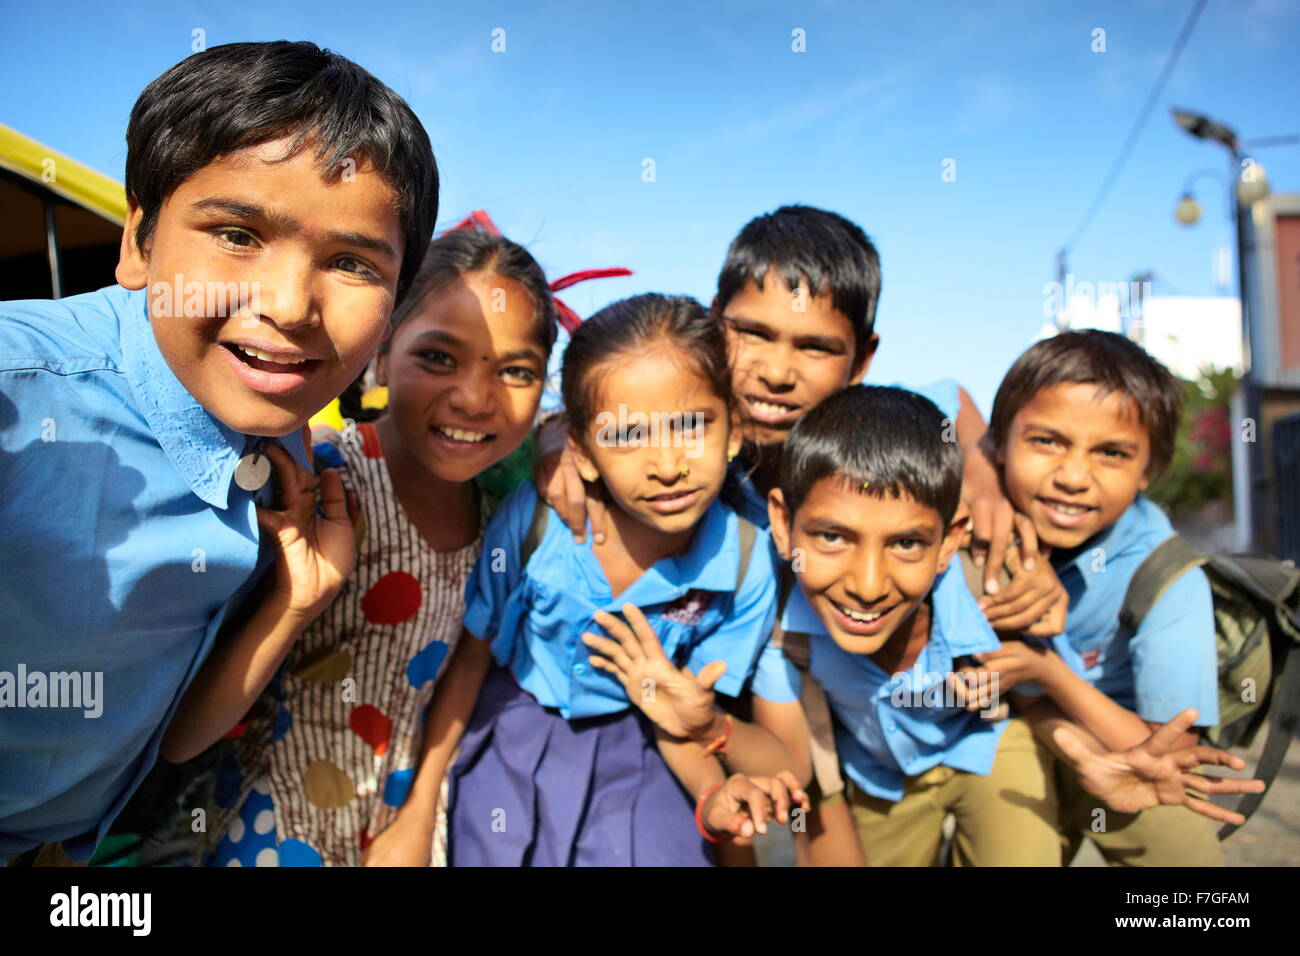 Portrait of india young smiling children coming back from school, street scene, Jodhpur, Rajasthan State, India Stock Photo